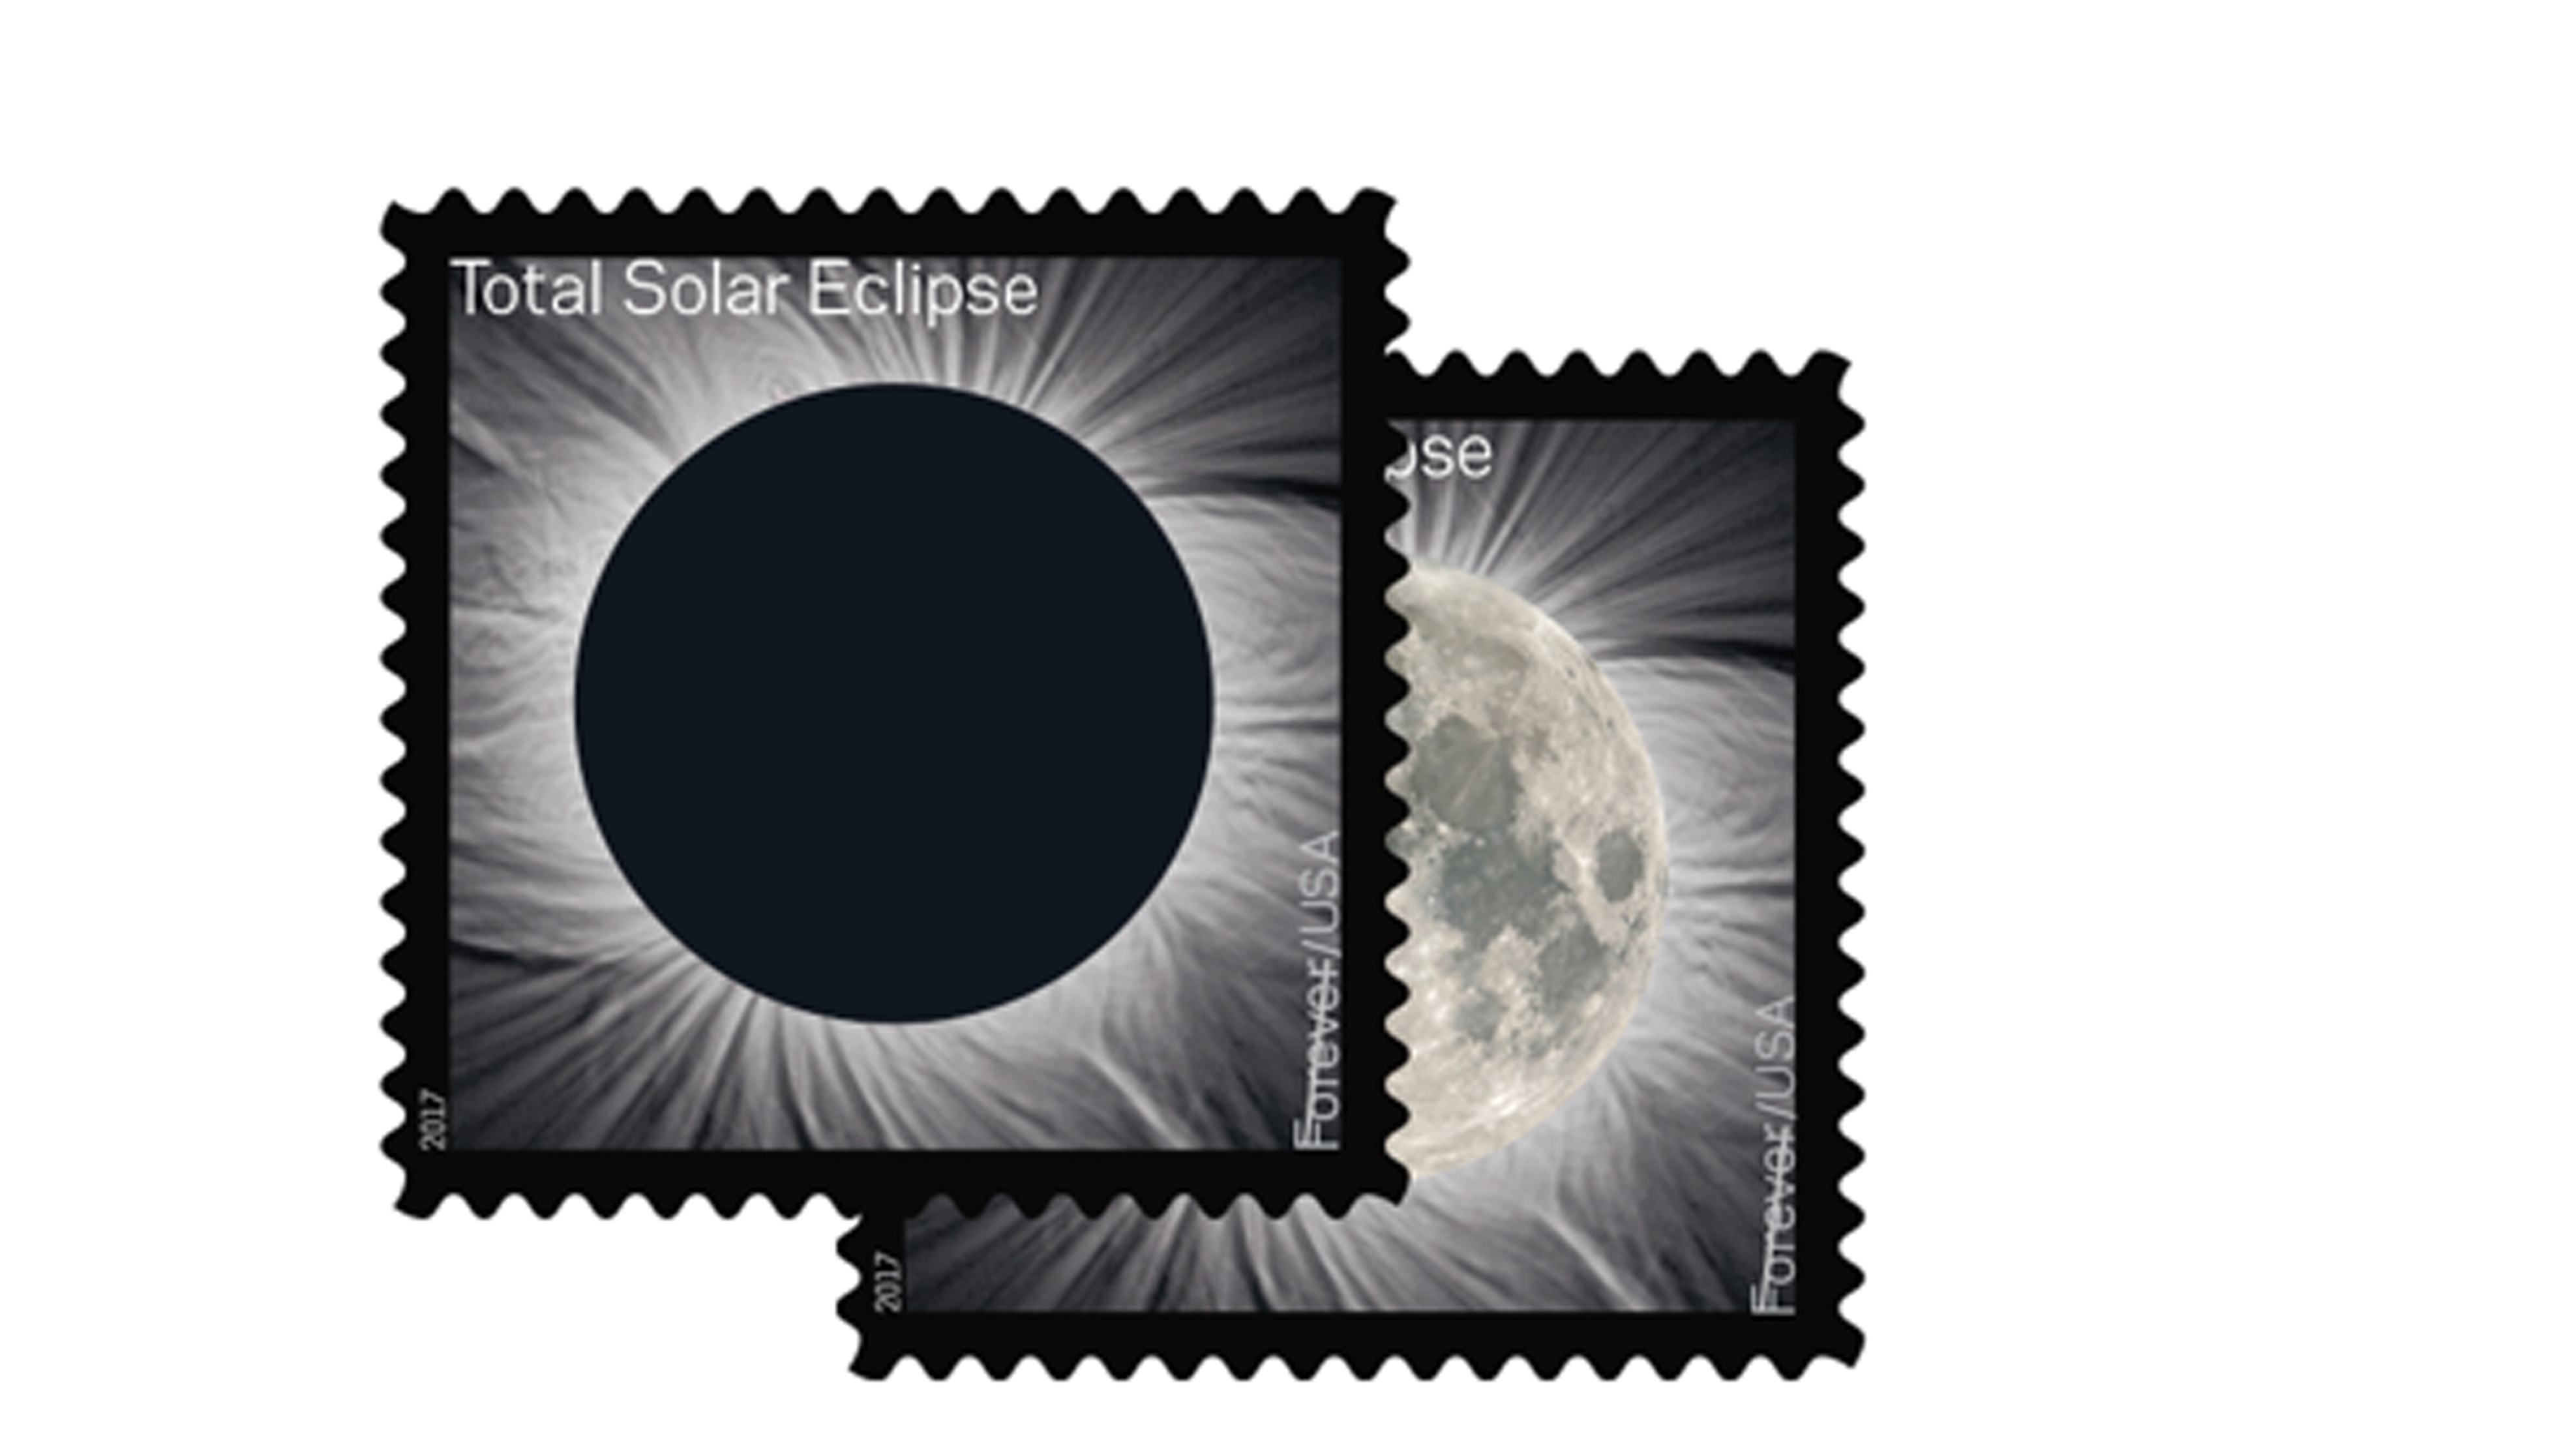 Visit the USPS trailer at Homestead to purchase your Eclipse forever stamps!